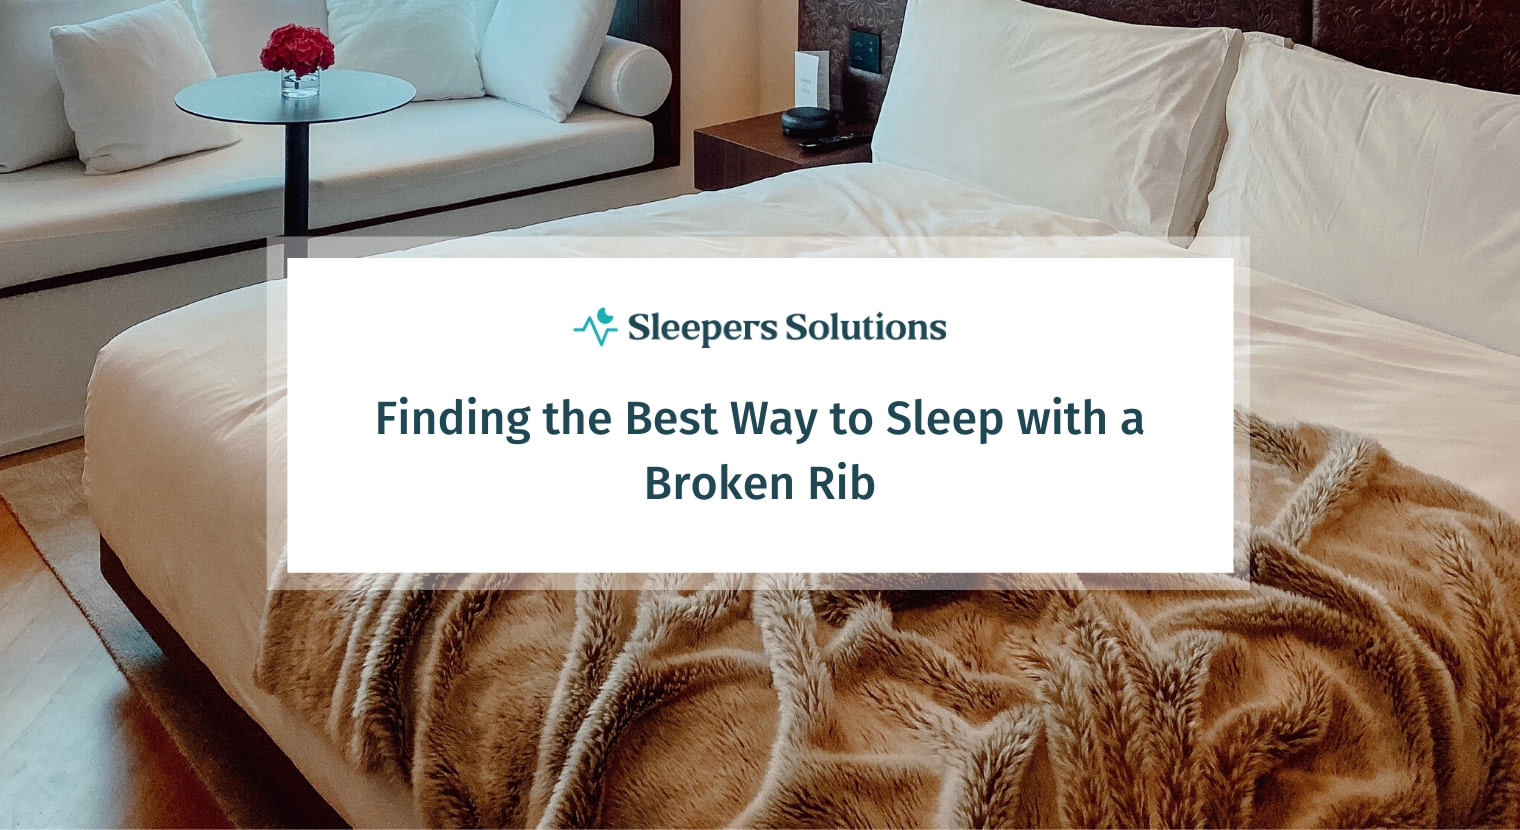 Finding the Best Way to Sleep With a Broken Rib